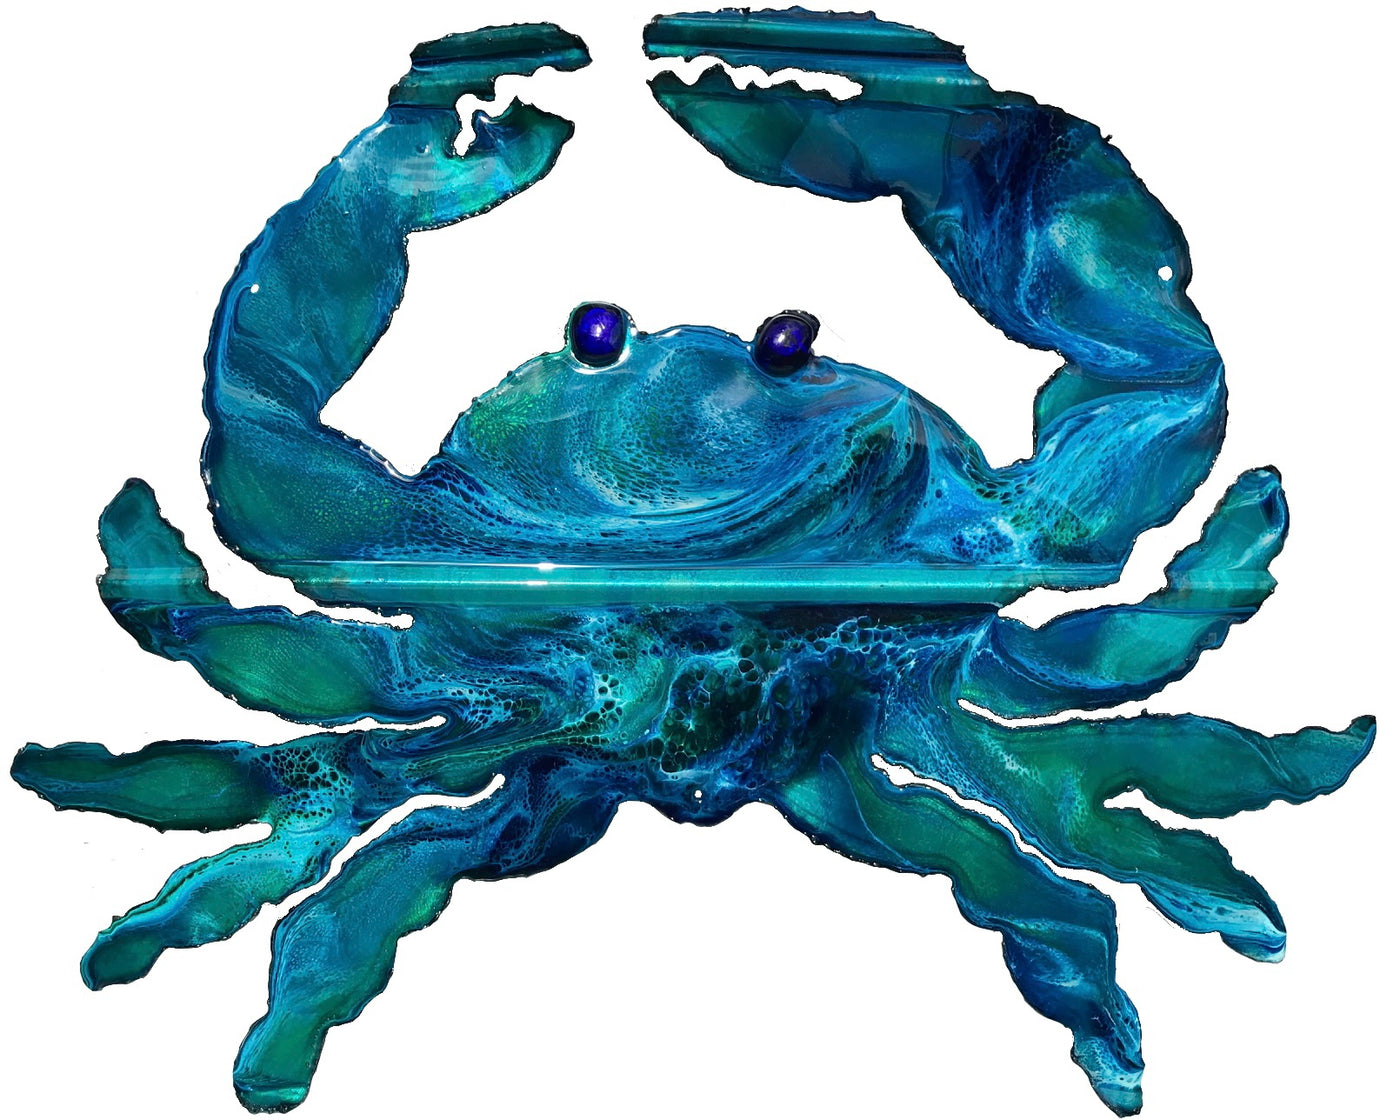 Crabs - 10th Avenue West Studios | One-Of-A-Kind Handmade Torch-Cut Metal Art